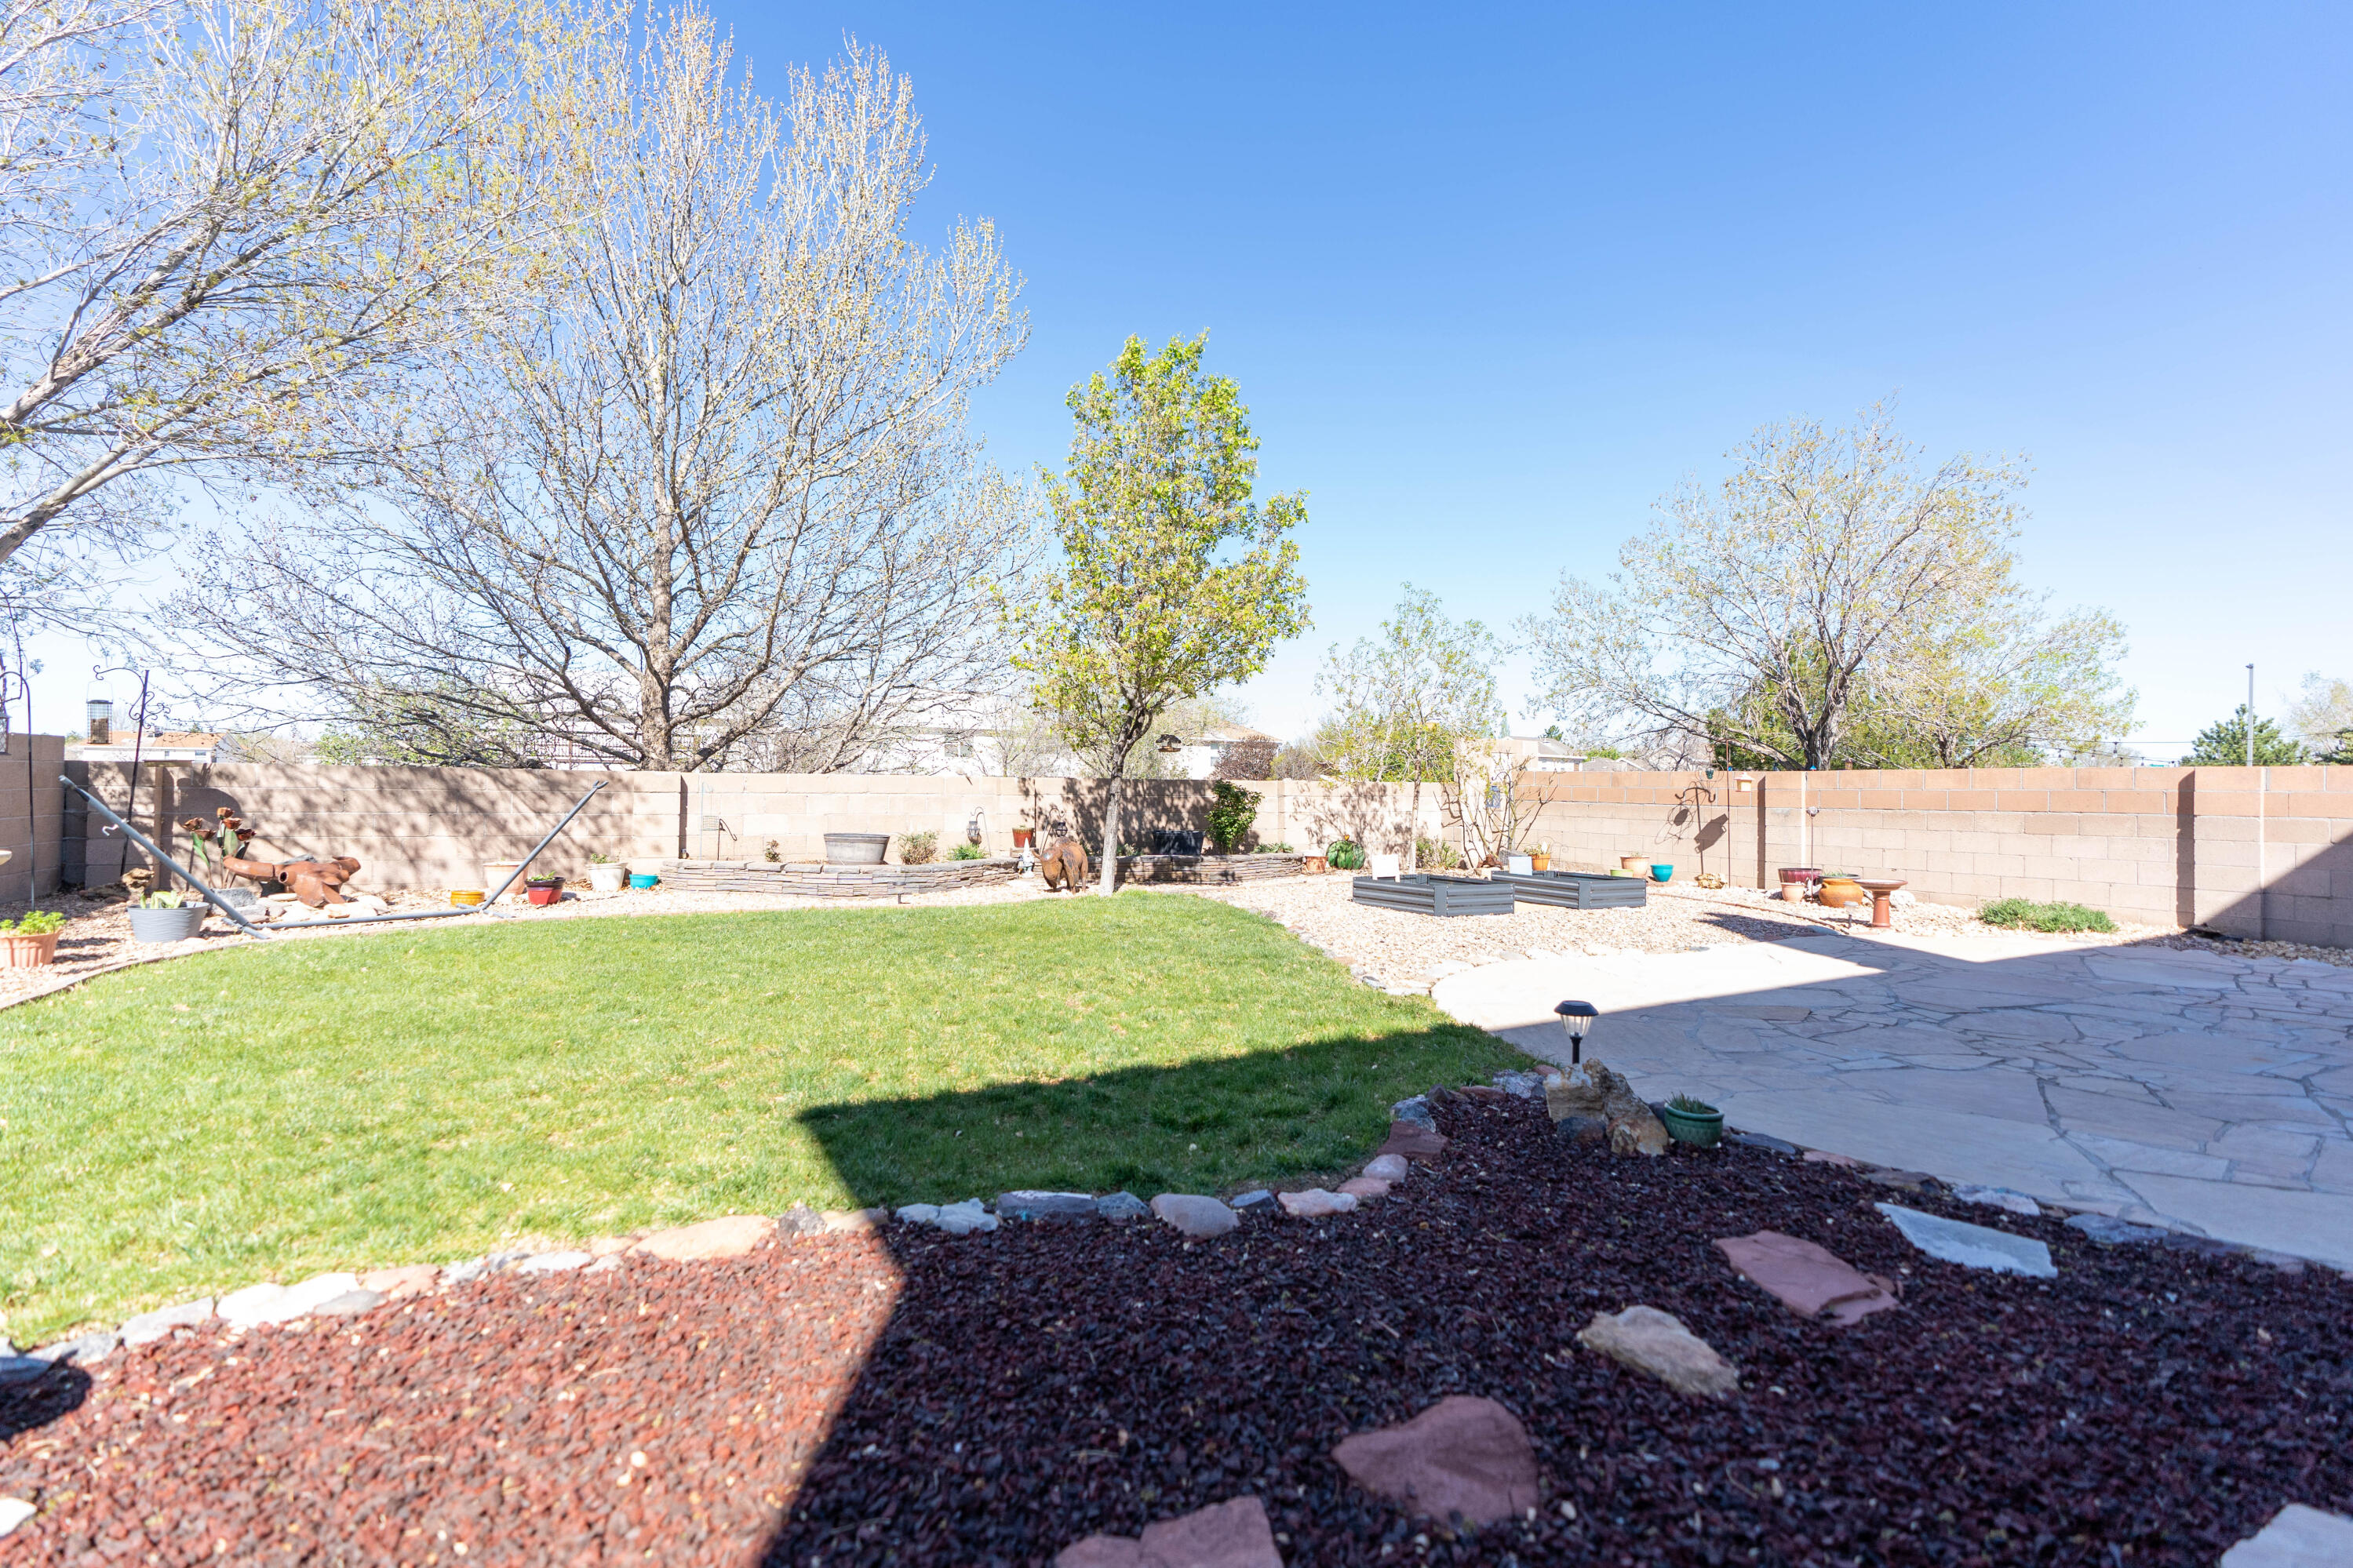 9905 Teton Place NW, Albuquerque, New Mexico 87114, 5 Bedrooms Bedrooms, ,3 BathroomsBathrooms,Residential,For Sale,9905 Teton Place NW,1061169